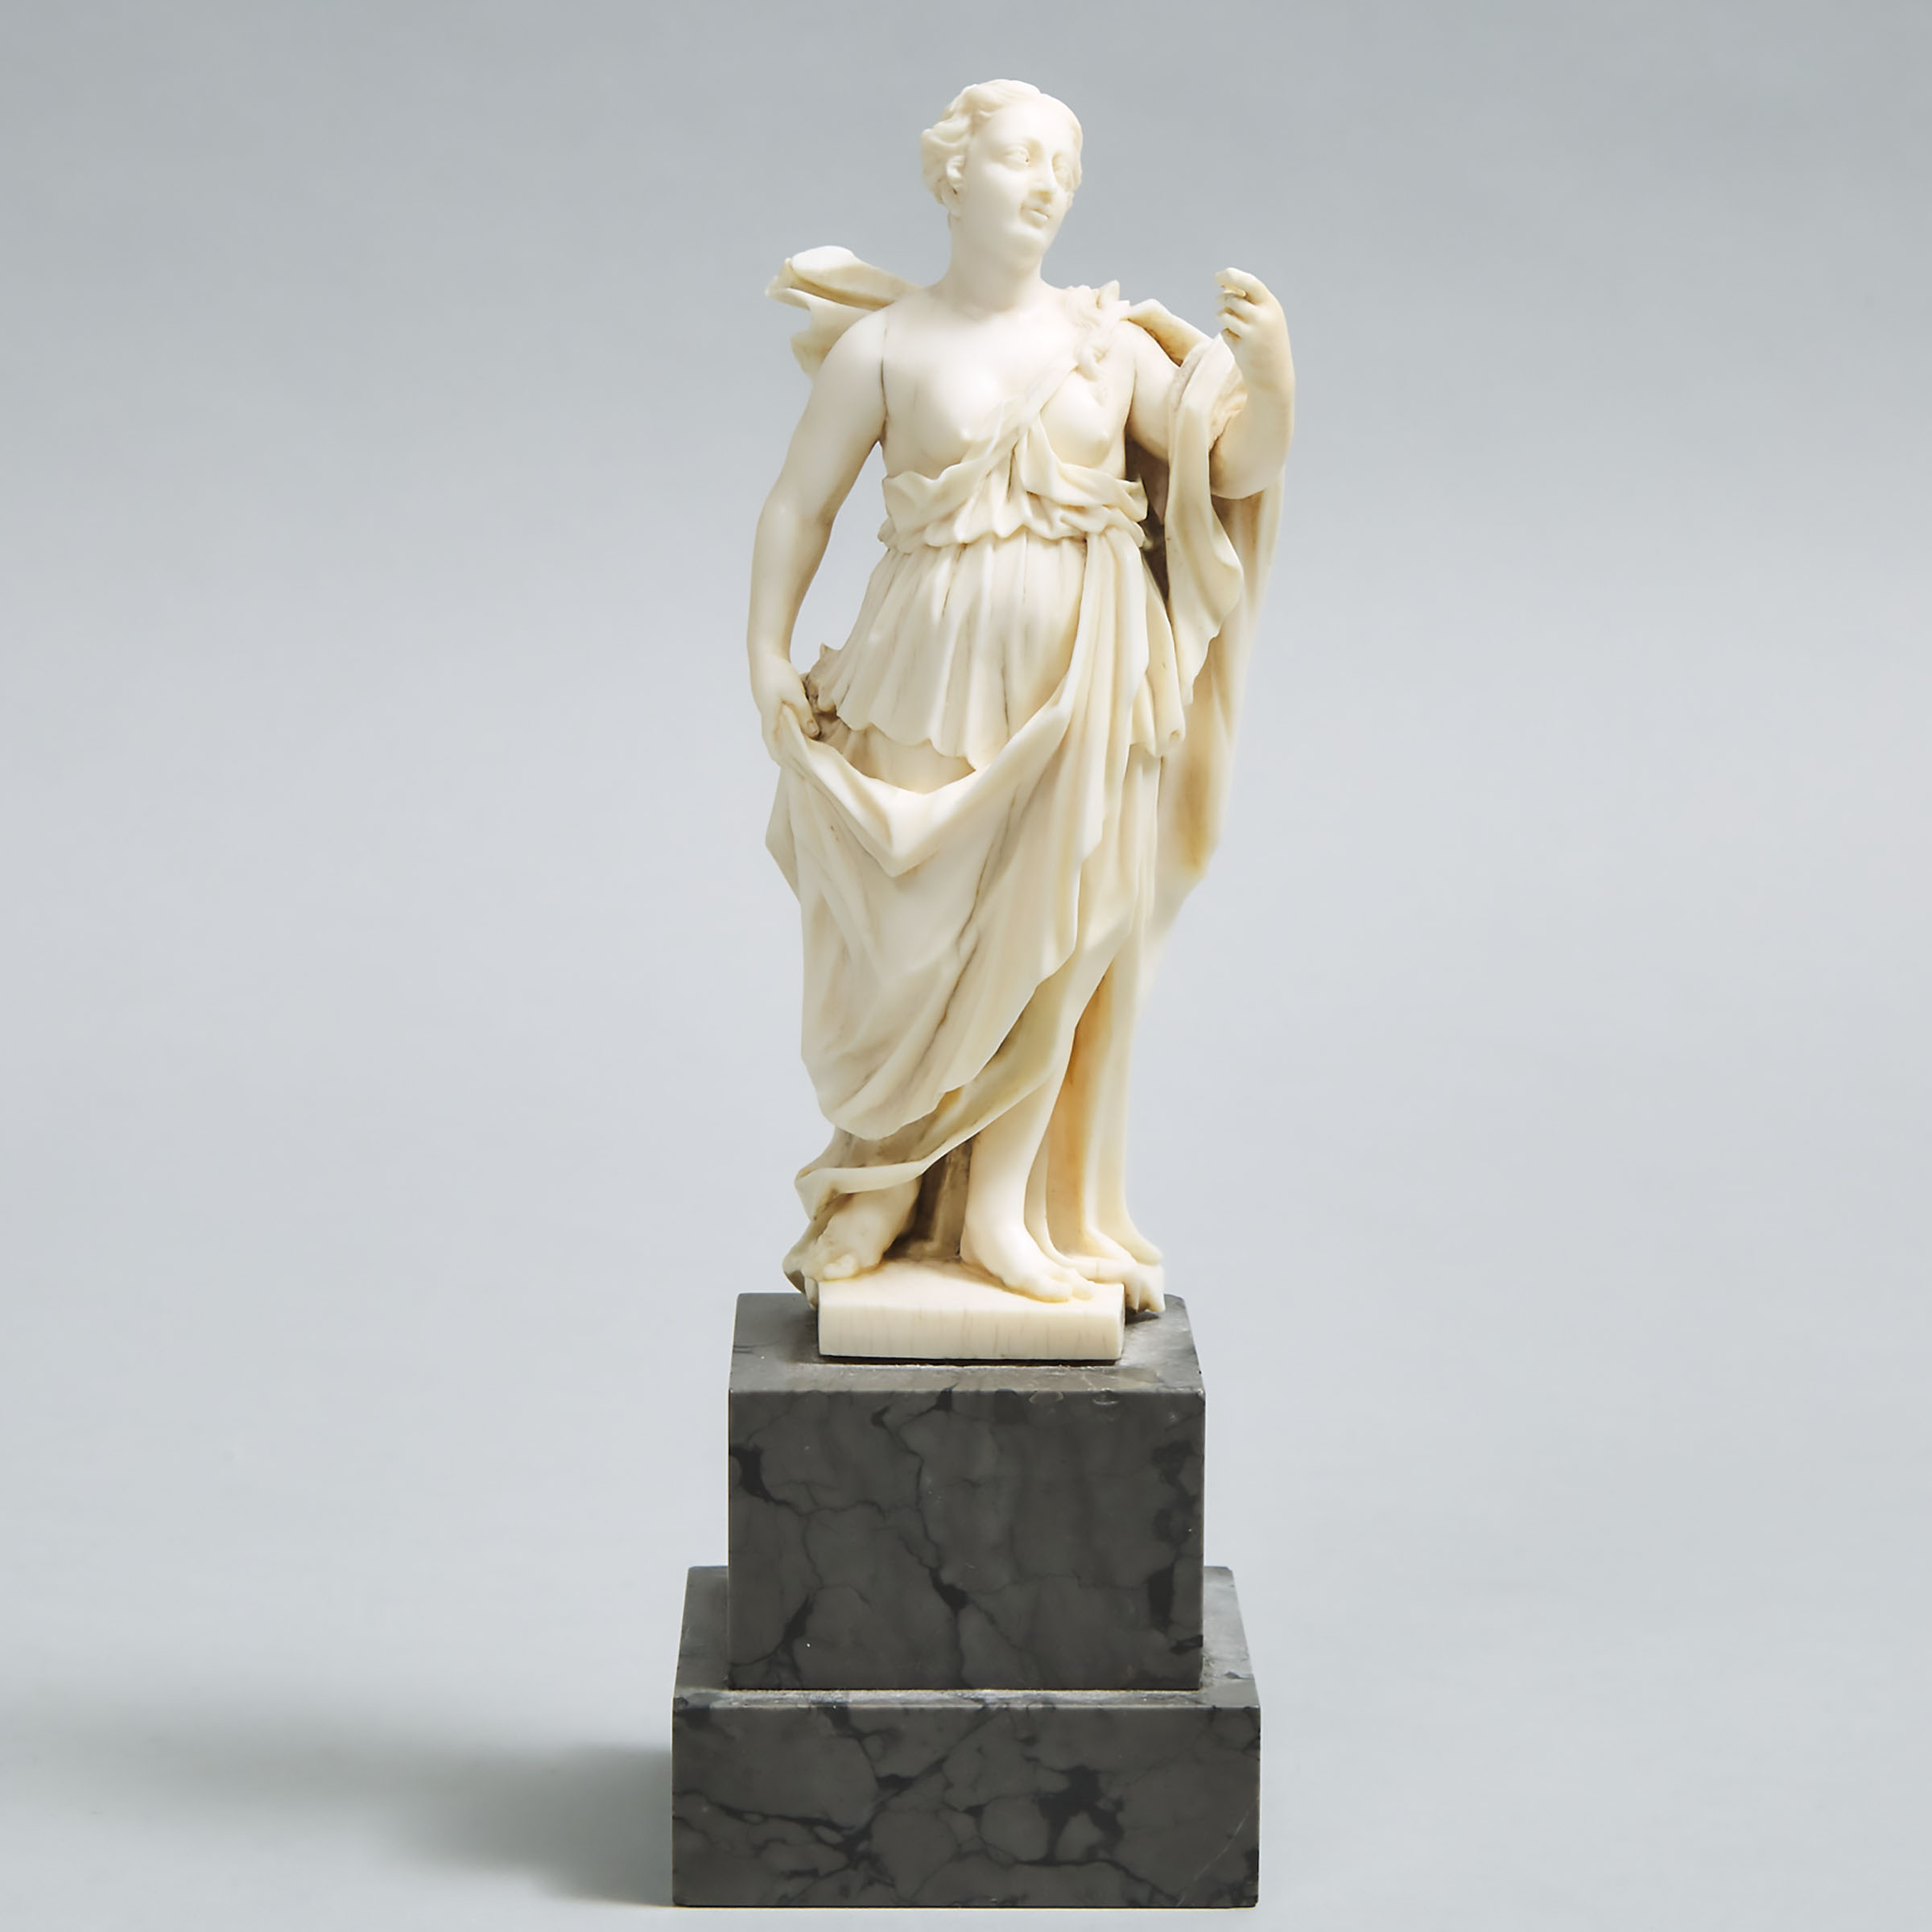 Carved Ivory Figure of a Roman Deity, early 19th century